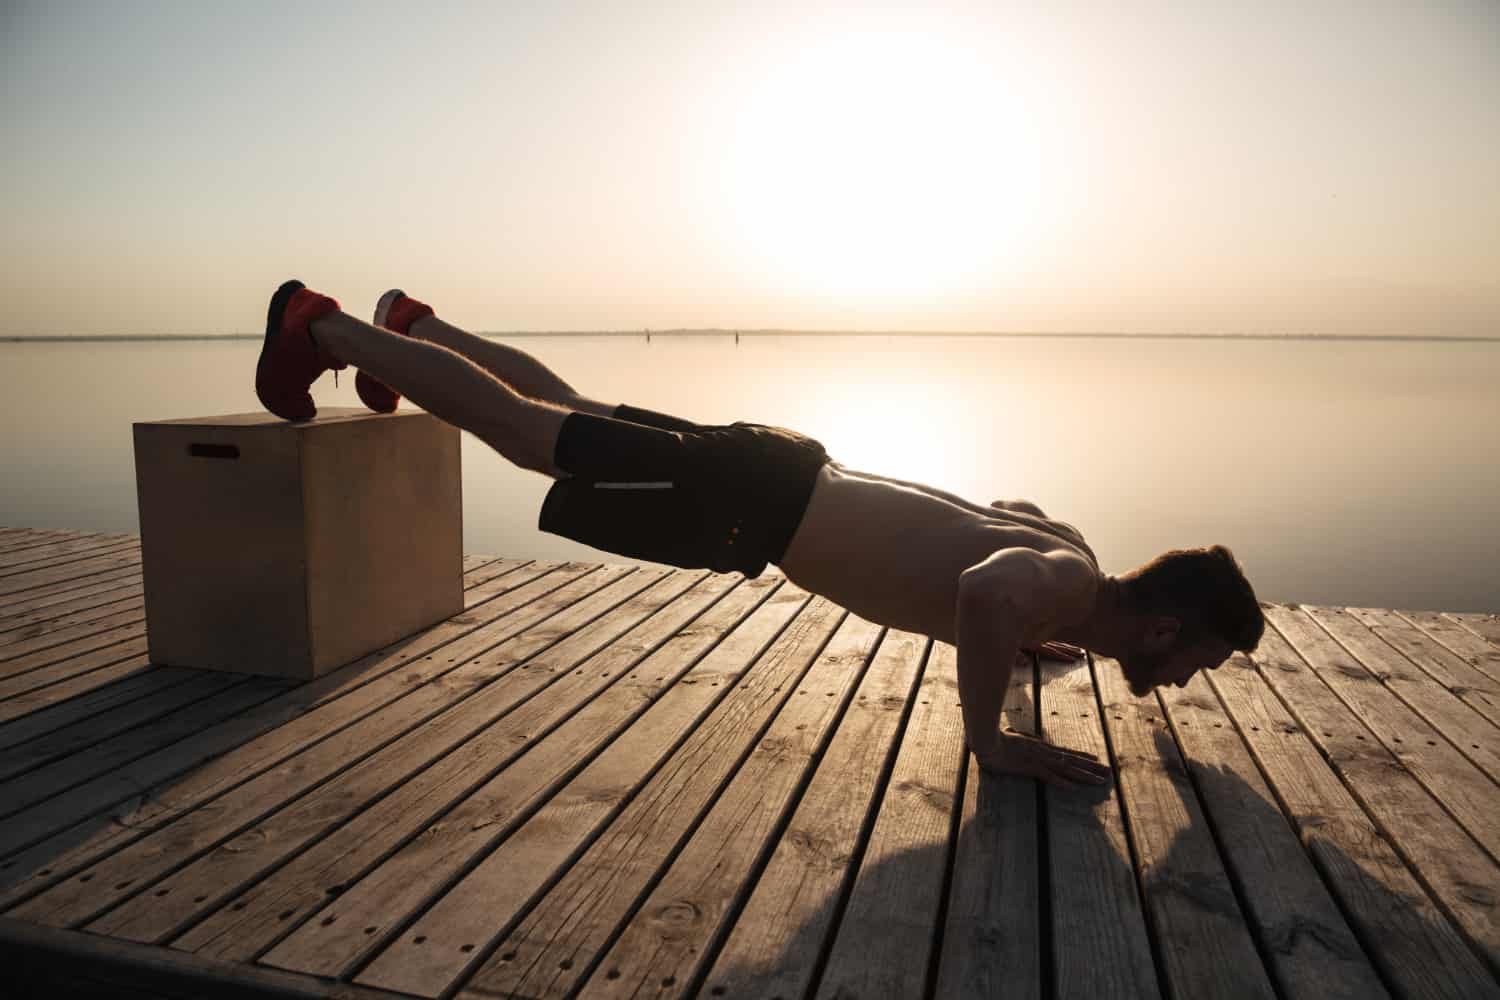 Men who can do 40 push-ups far less likely to develop heart disease - Study  Finds